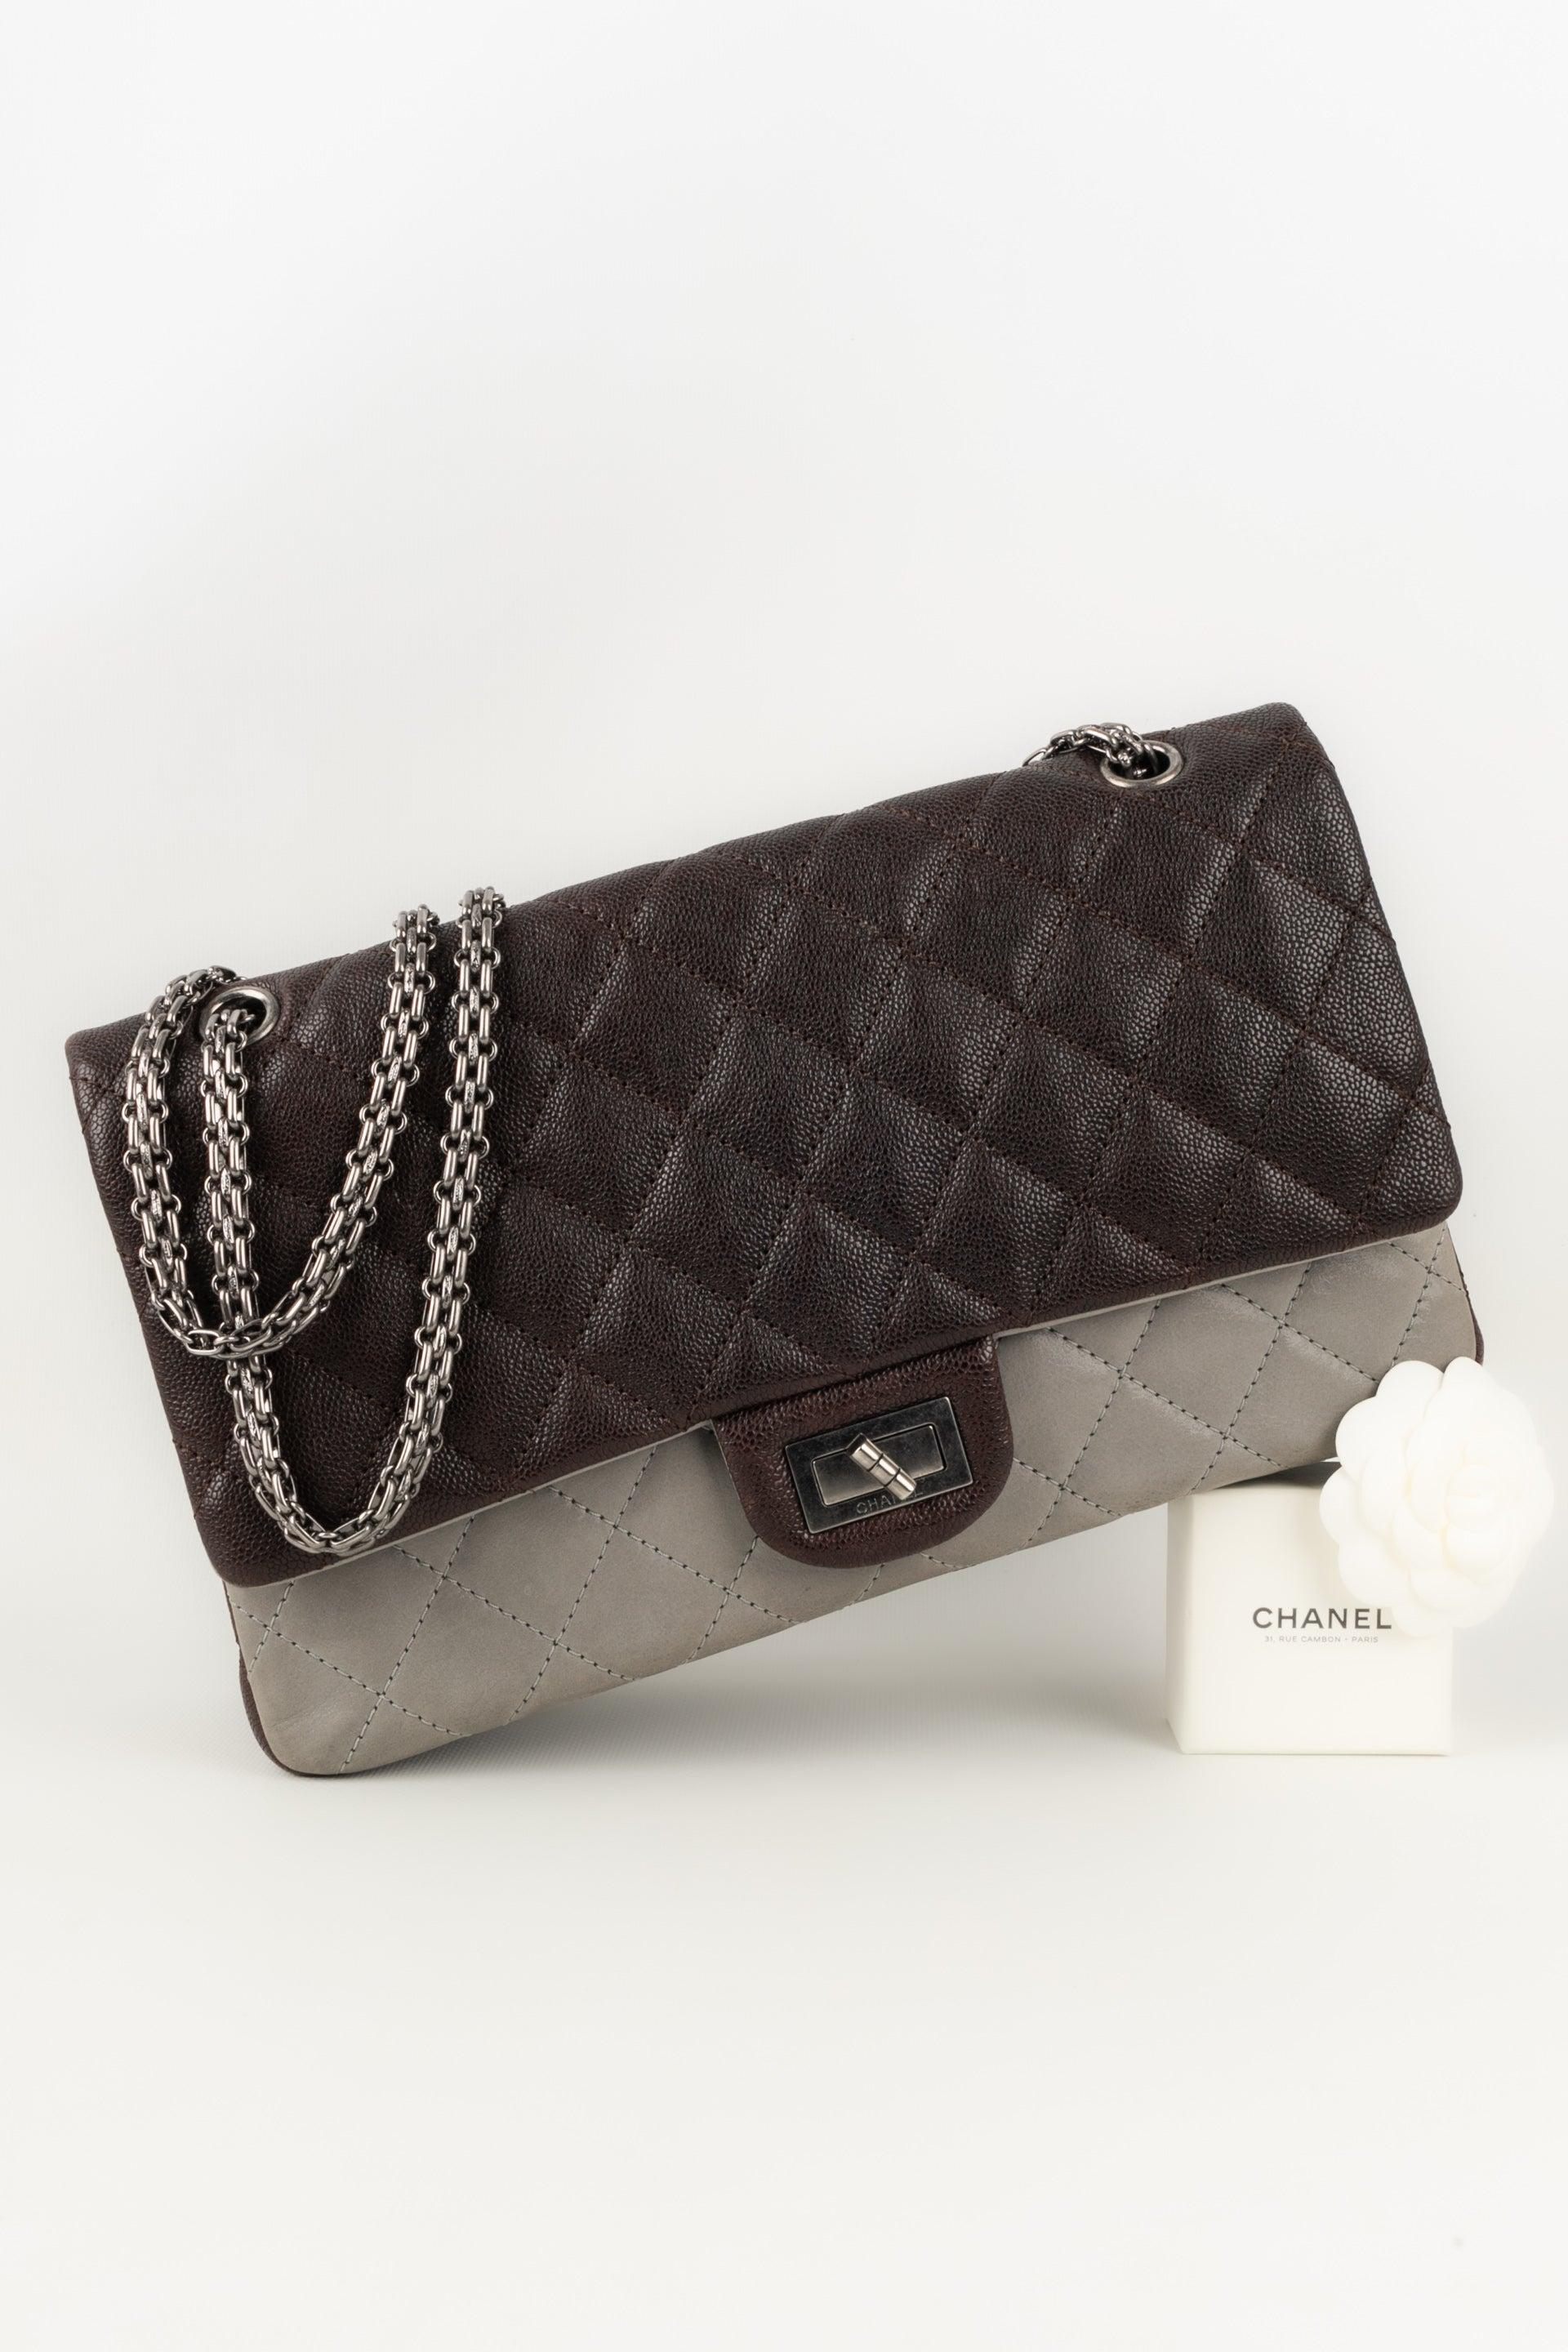 Chanel 2.55 Leather & Grain Leather Bag with Silvery Metal Elements, 2010/2011 For Sale 6